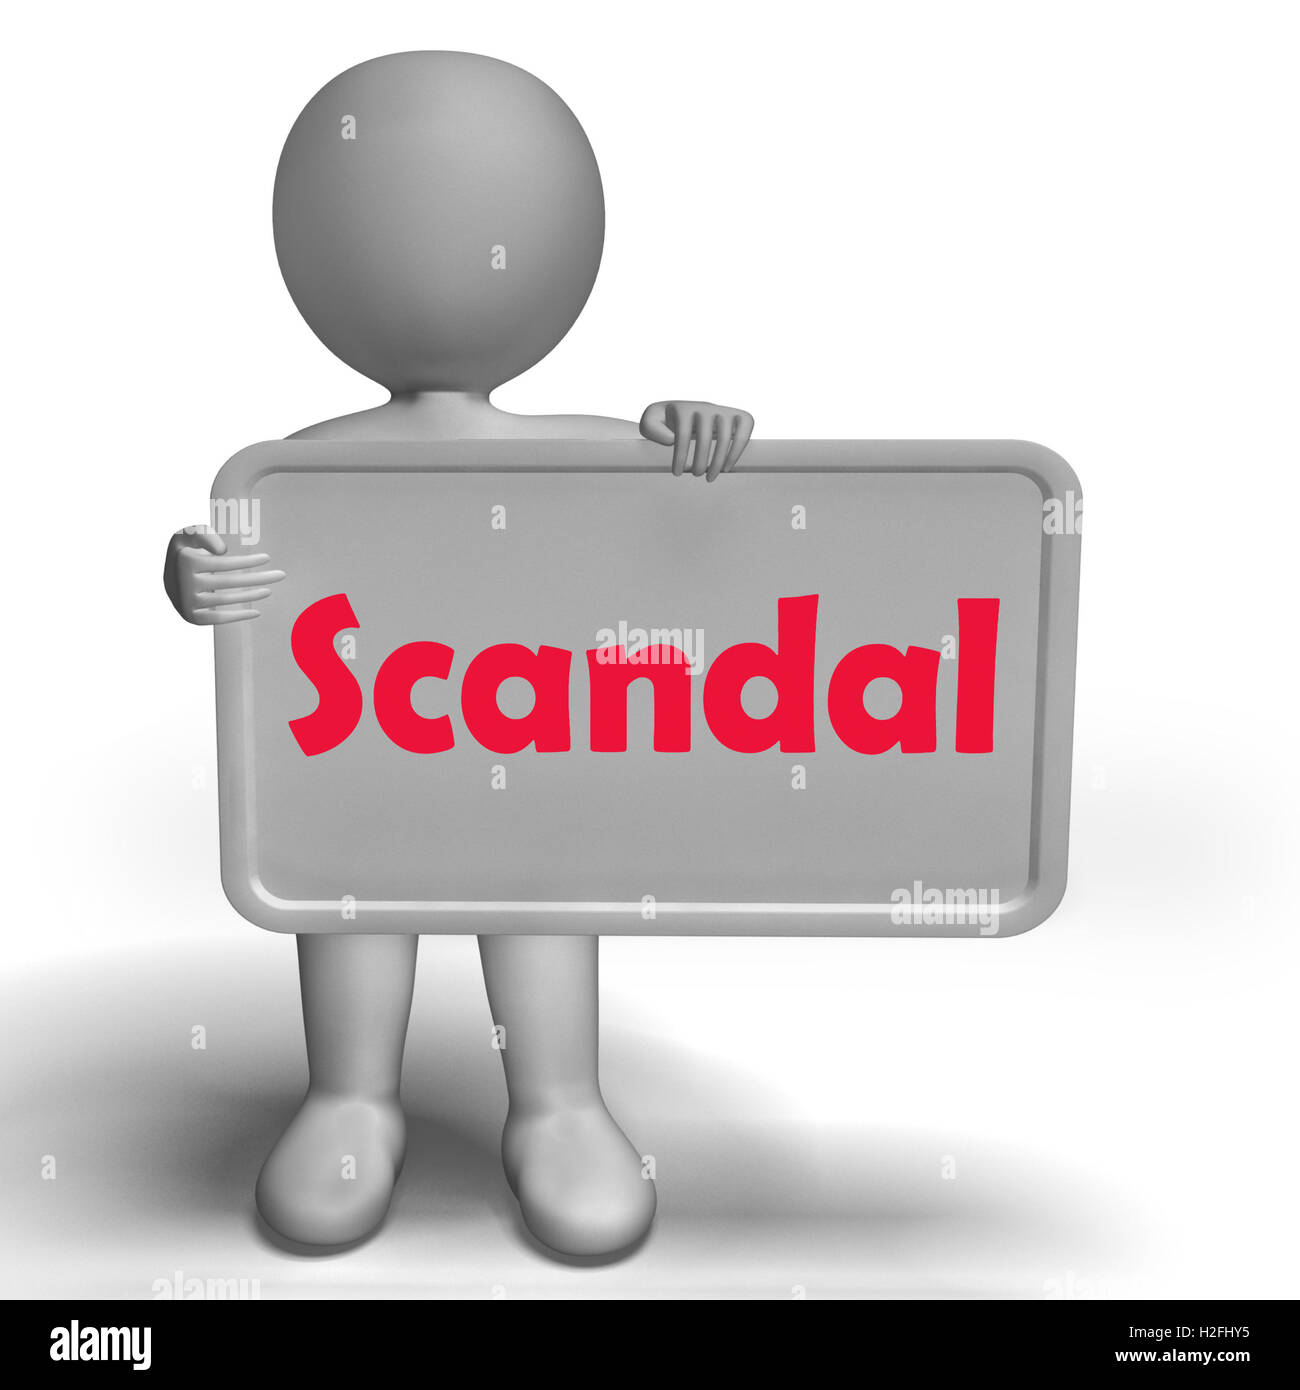 Scandal Sign Means Scandalous Act Or Disgrace Stock Photo